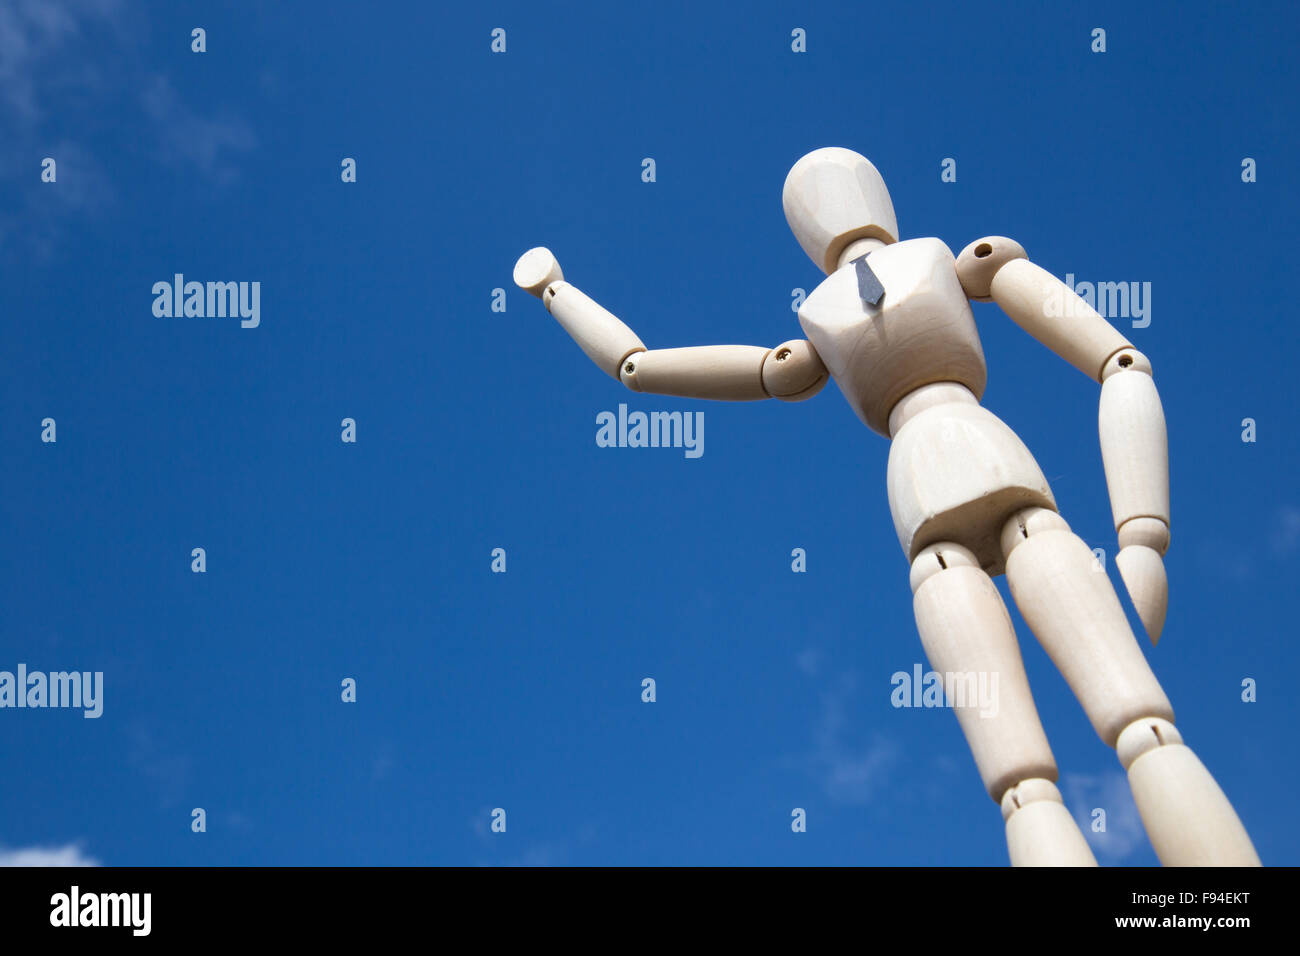 Giant businessman puppet waving in front of blue sky in sunlight Stock Photo